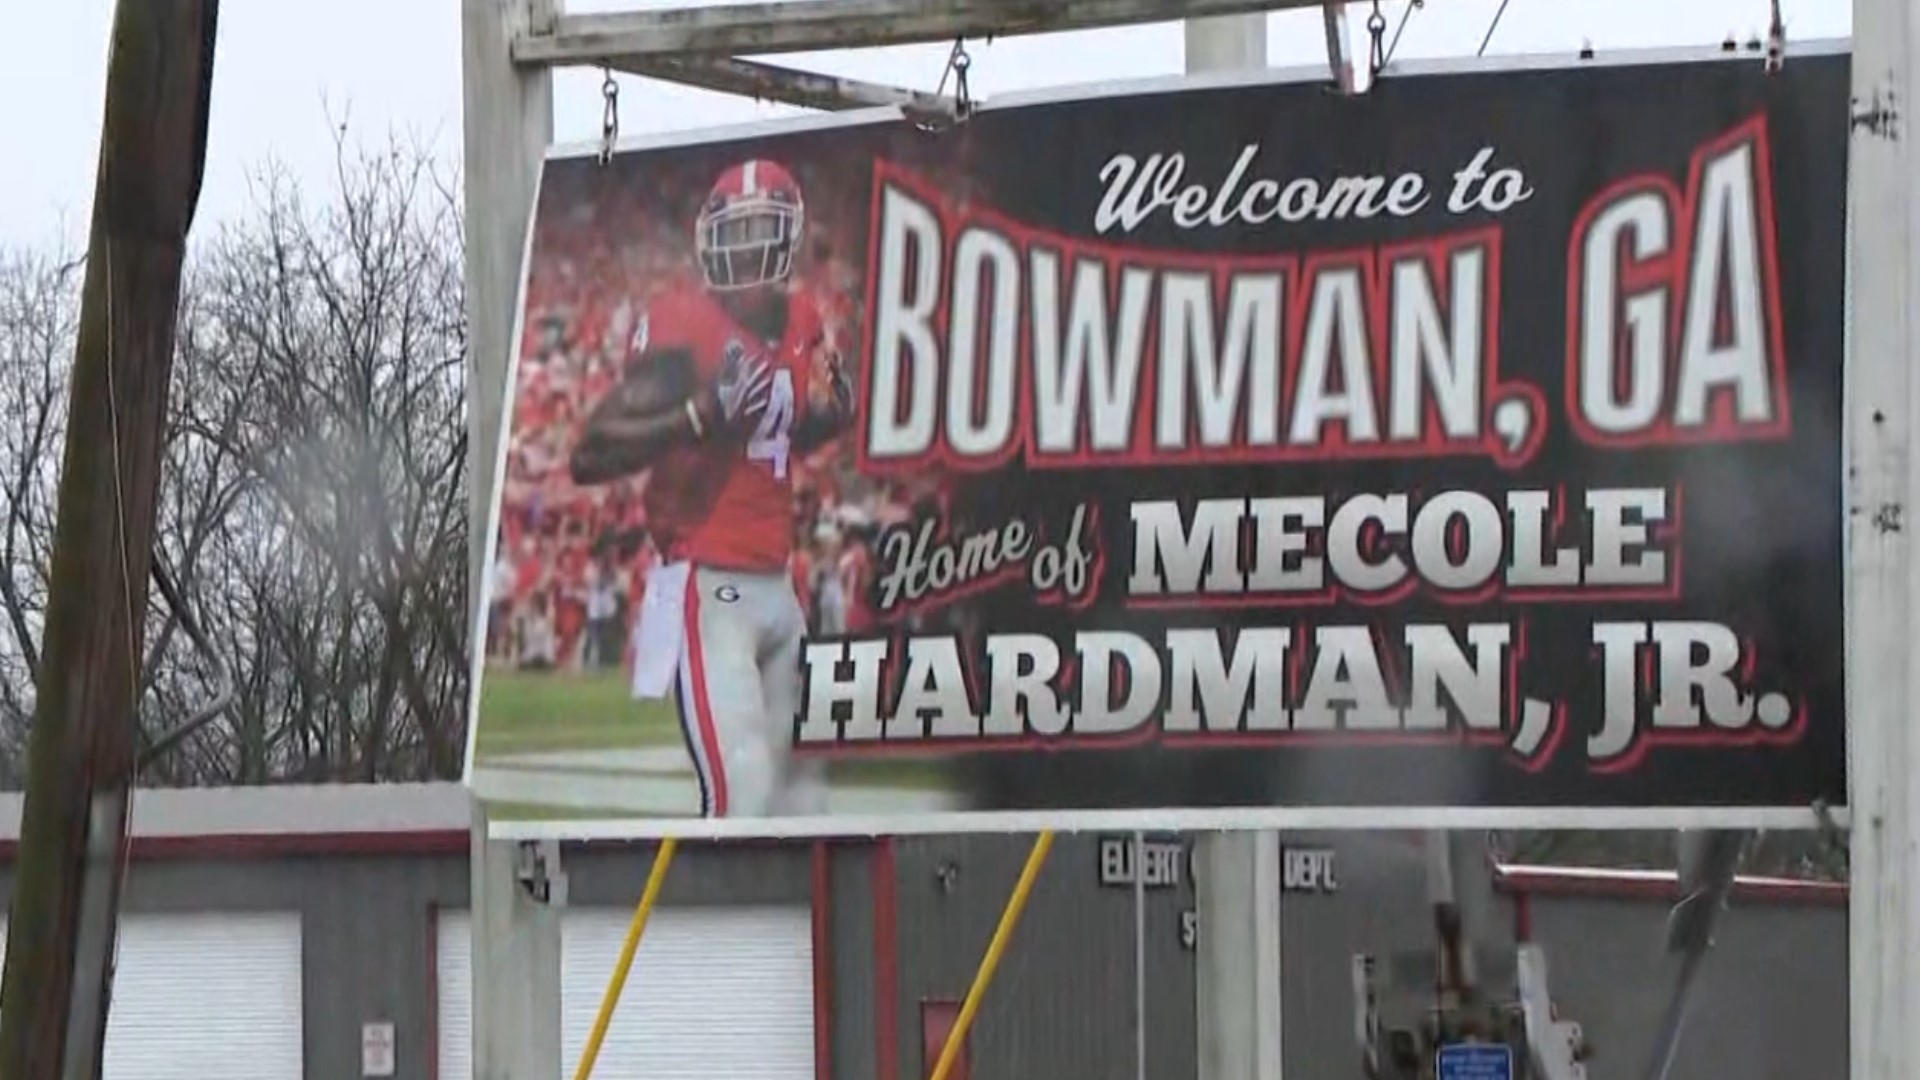 Kansas City Chiefs WR Mecole Hardman grew up in Bowman, Georgia, where he is being showered in praise for sealing the team's third Super Bowl victory in five years